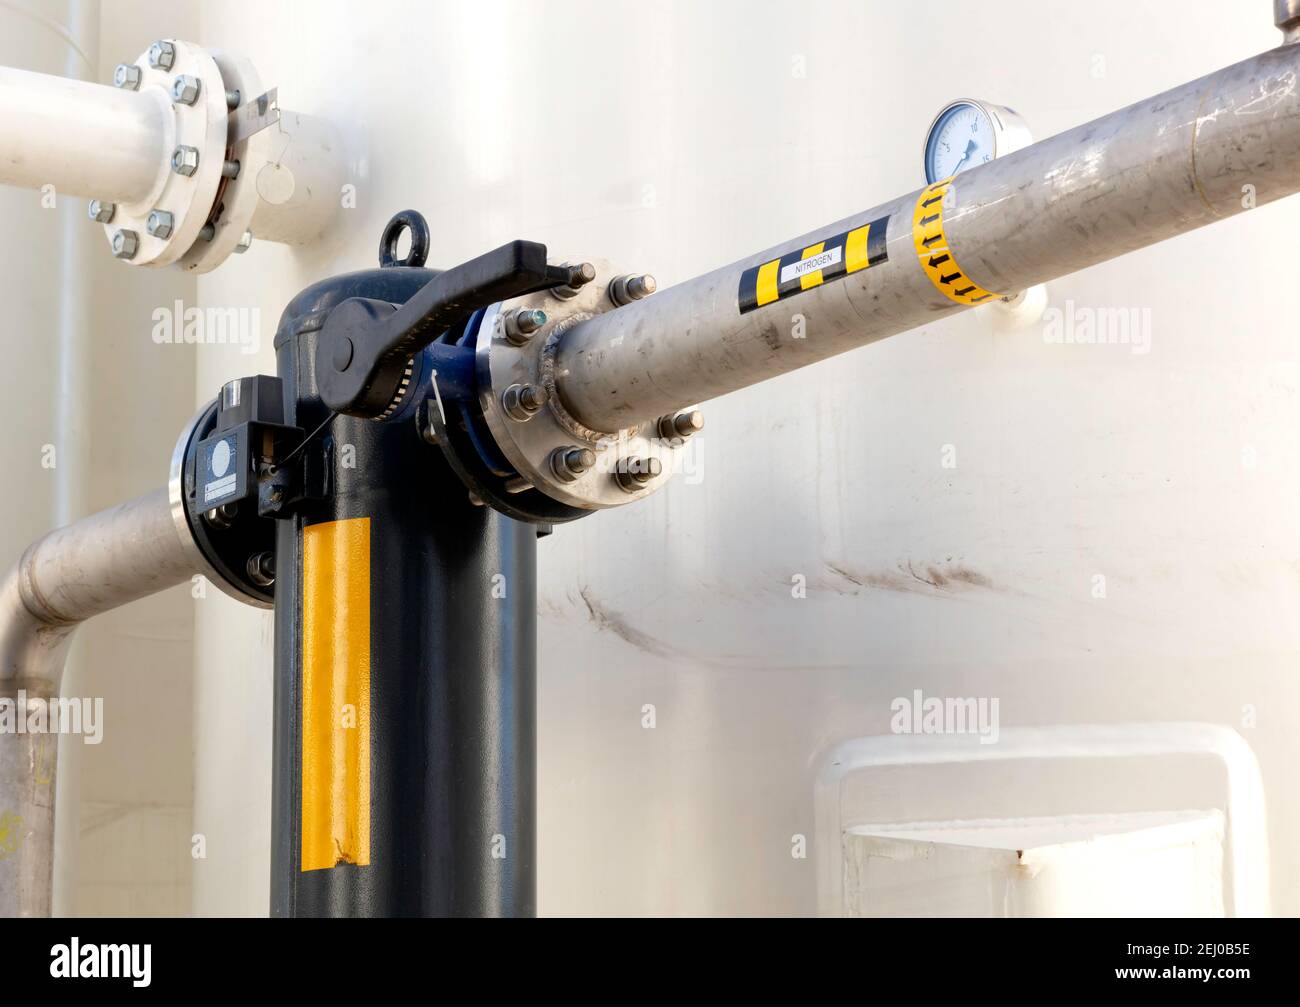 industry installation with a gas valve open and filter color blach, iron pipes and bolts for high pressure system Stock Photo